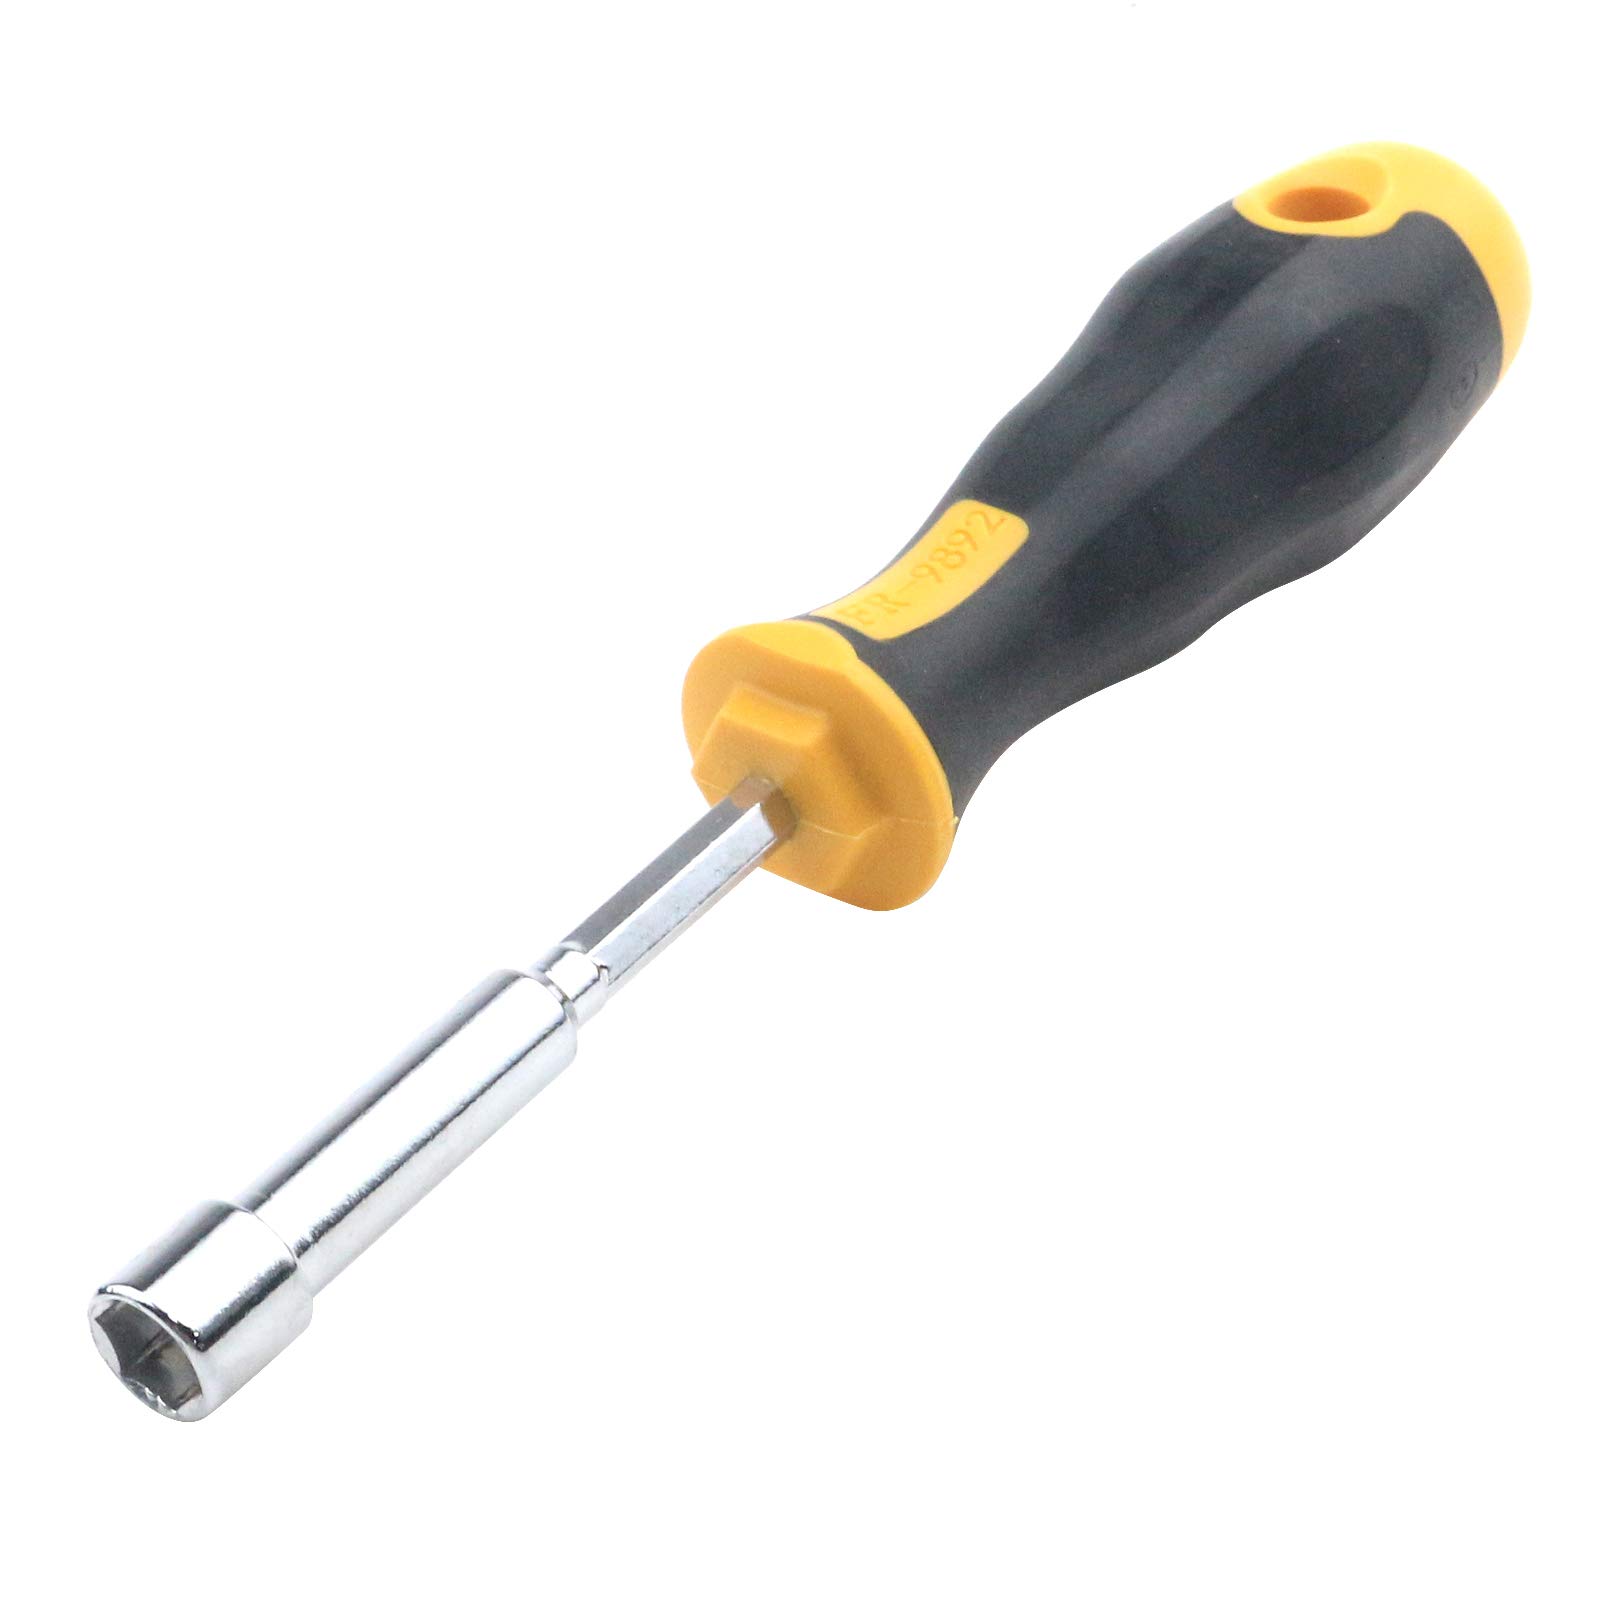 Wrench or screwdriver